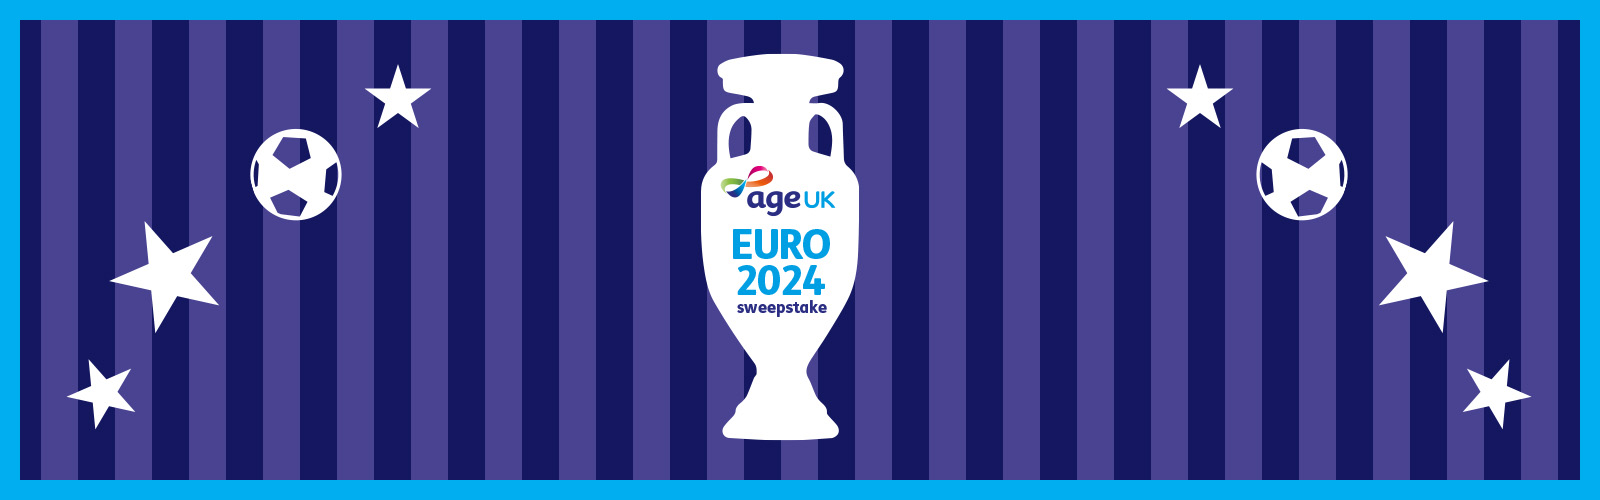 A illustration of the Euro trophy